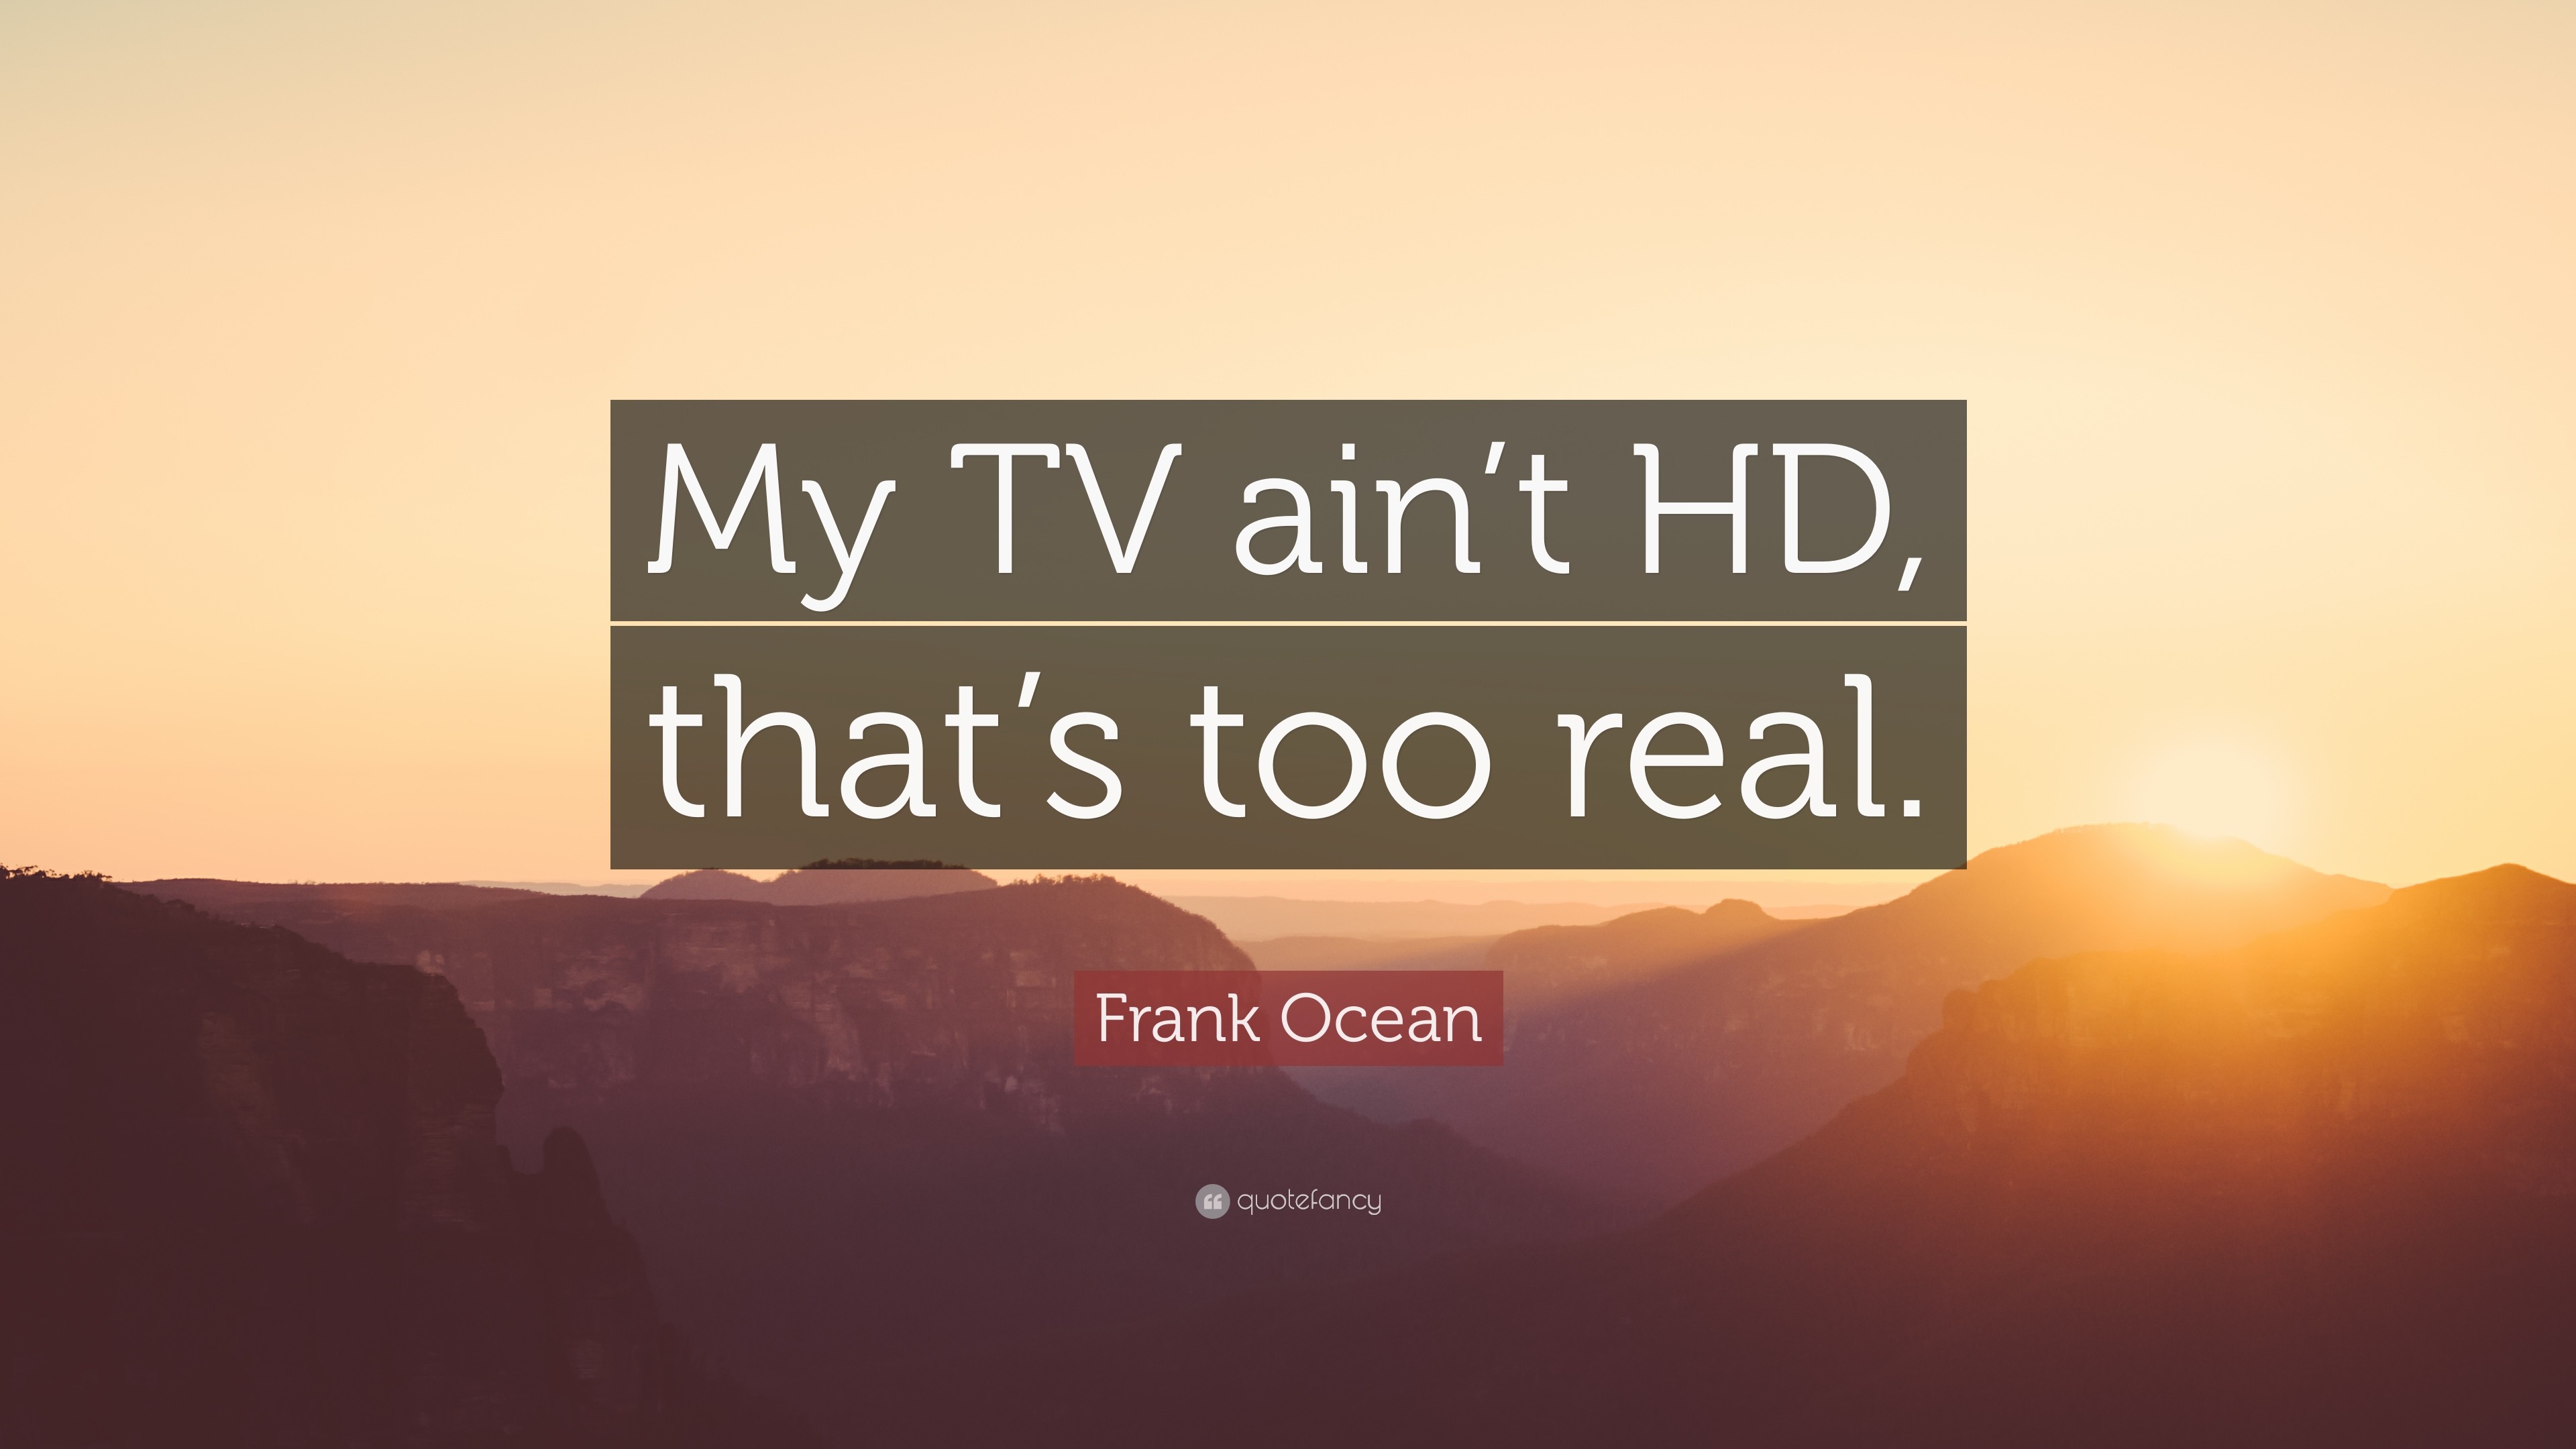 3840x2160 Frank Ocean Quote: “My TV ain't HD, that's too real.